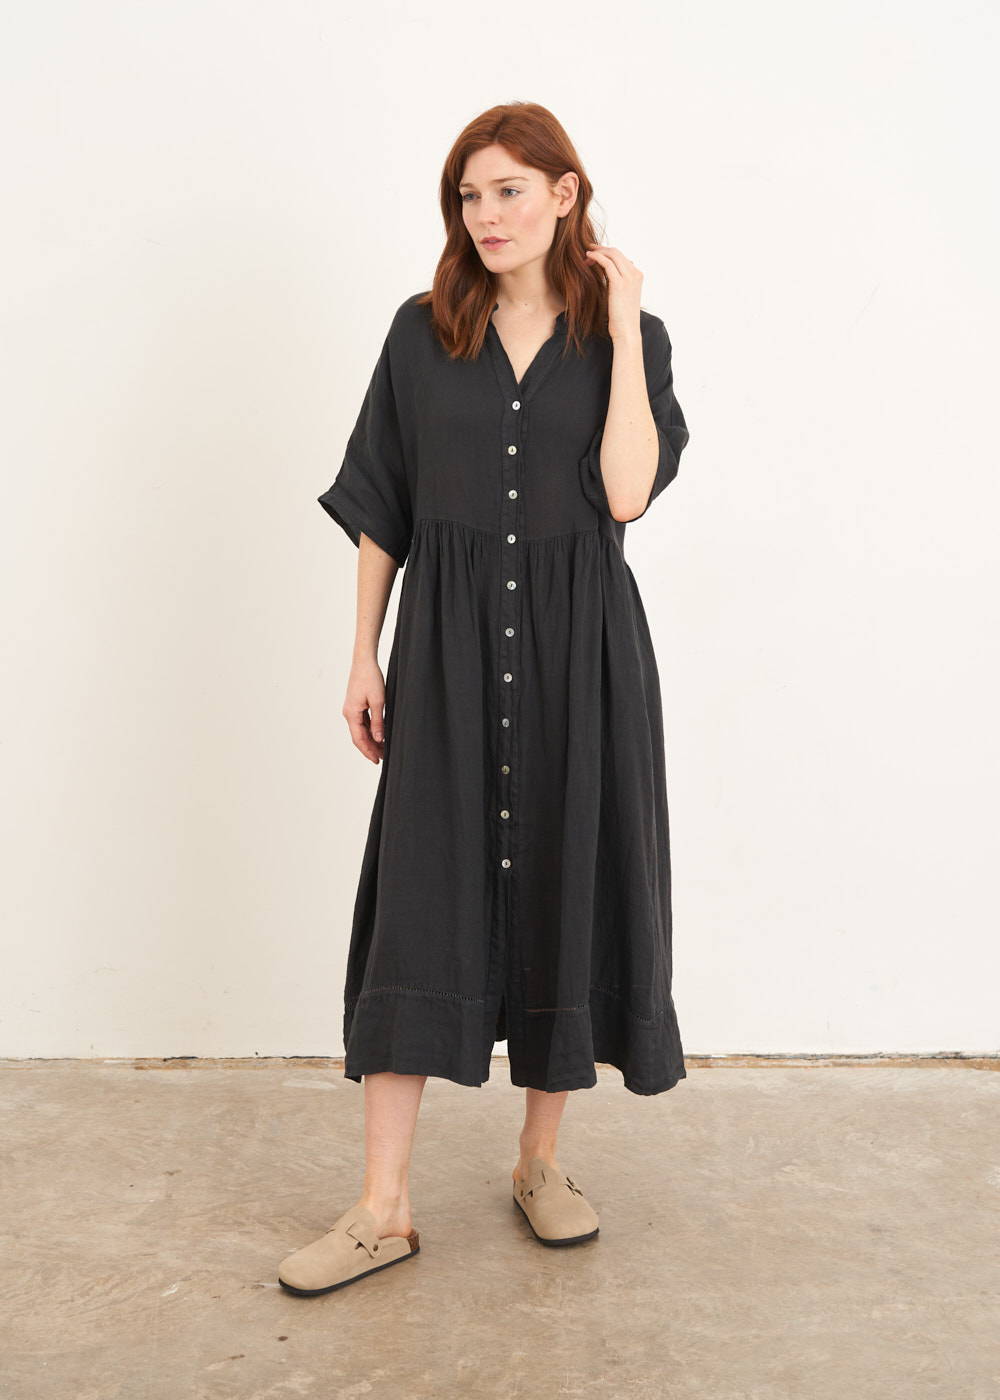 A model wearing an oversized linen midi shirt dress in dark grey with mother of pearl buttons 